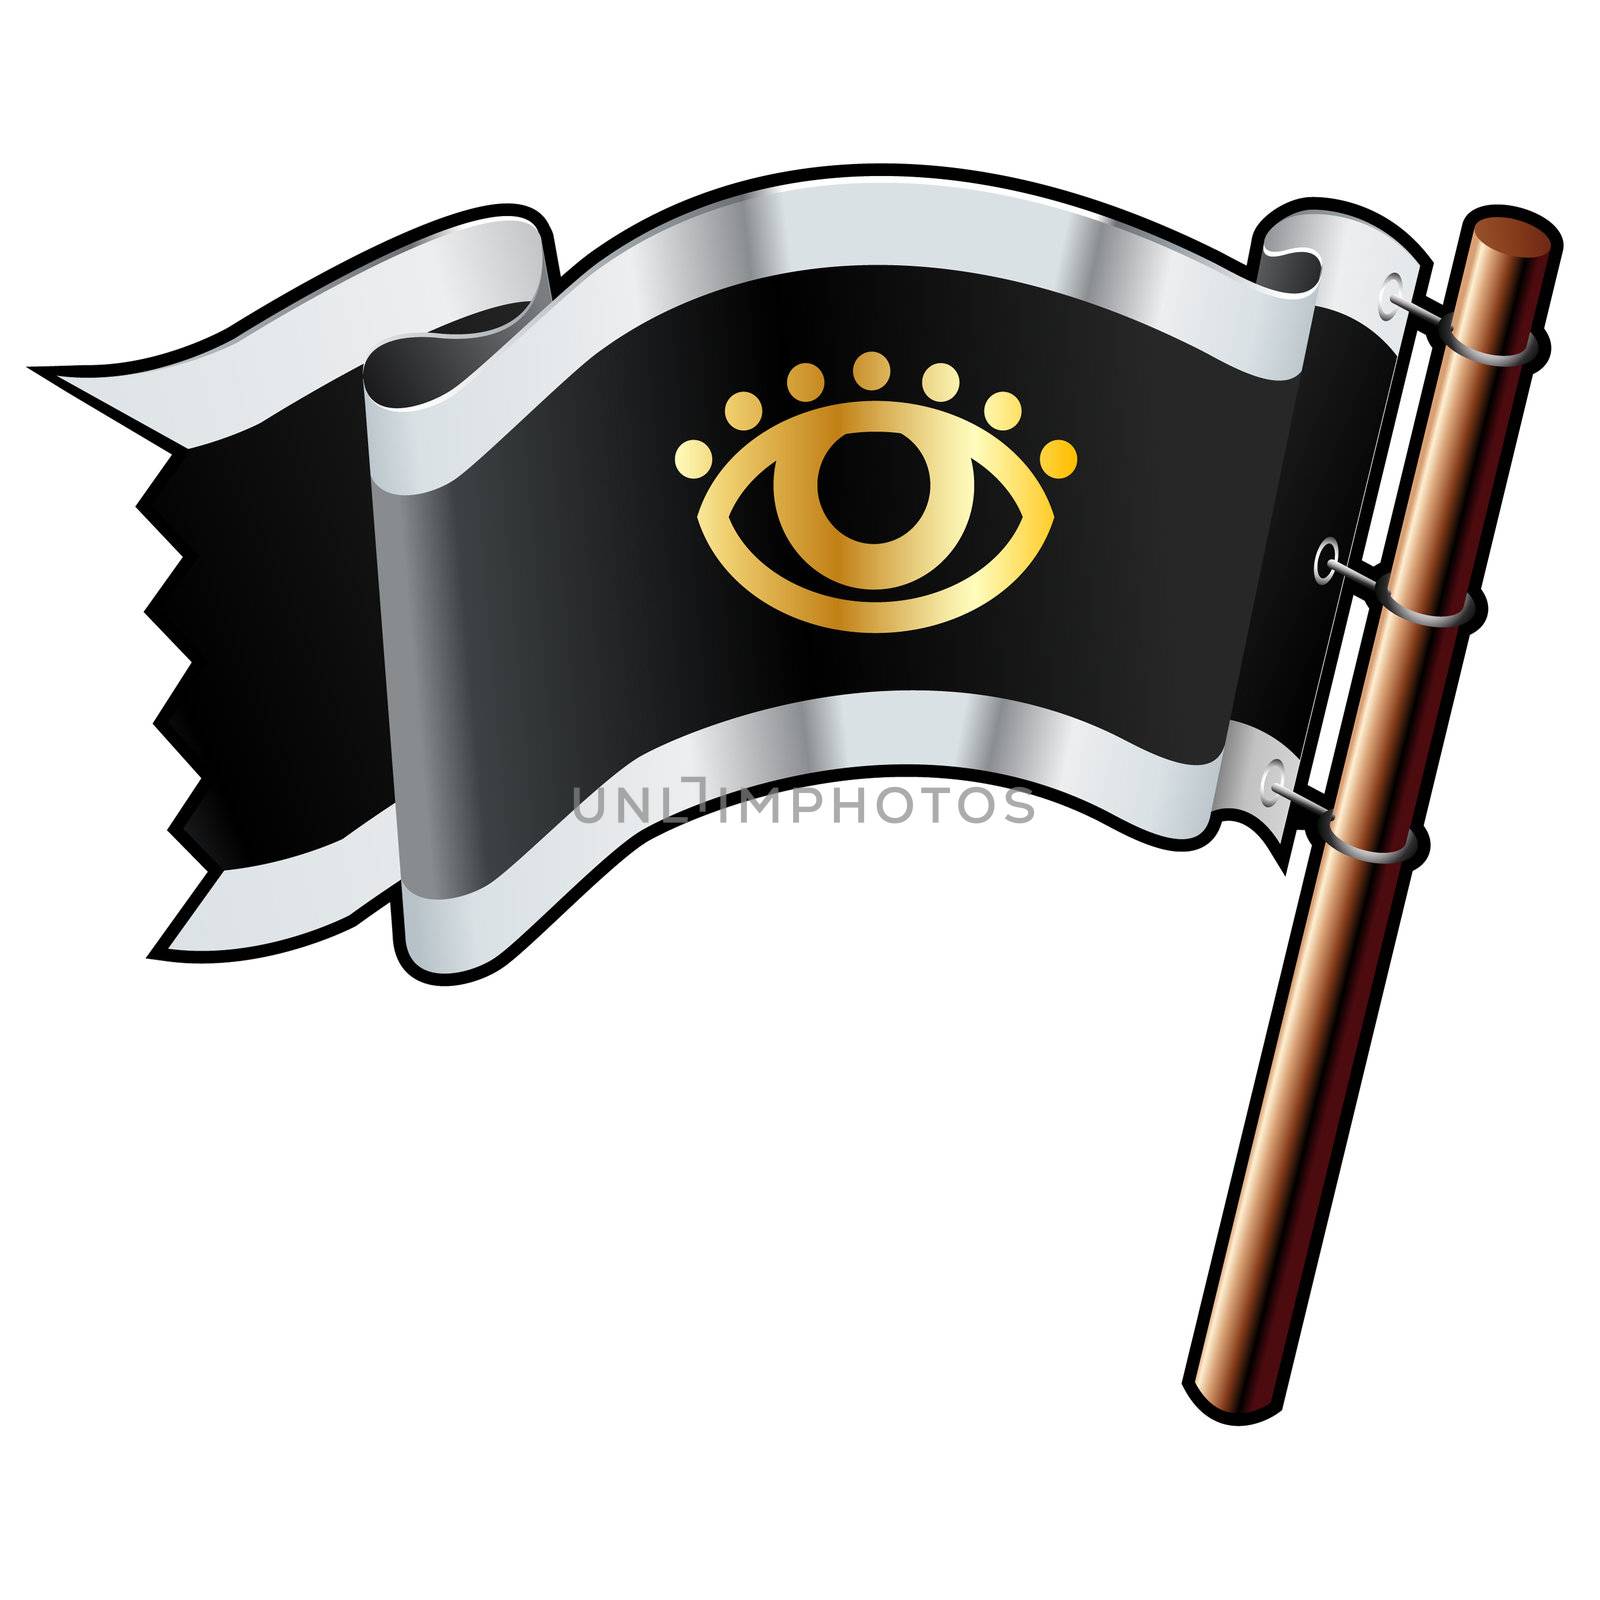 Eye or look icon on black, silver, and gold vector flag good for use on websites, in print, or on promotional materials